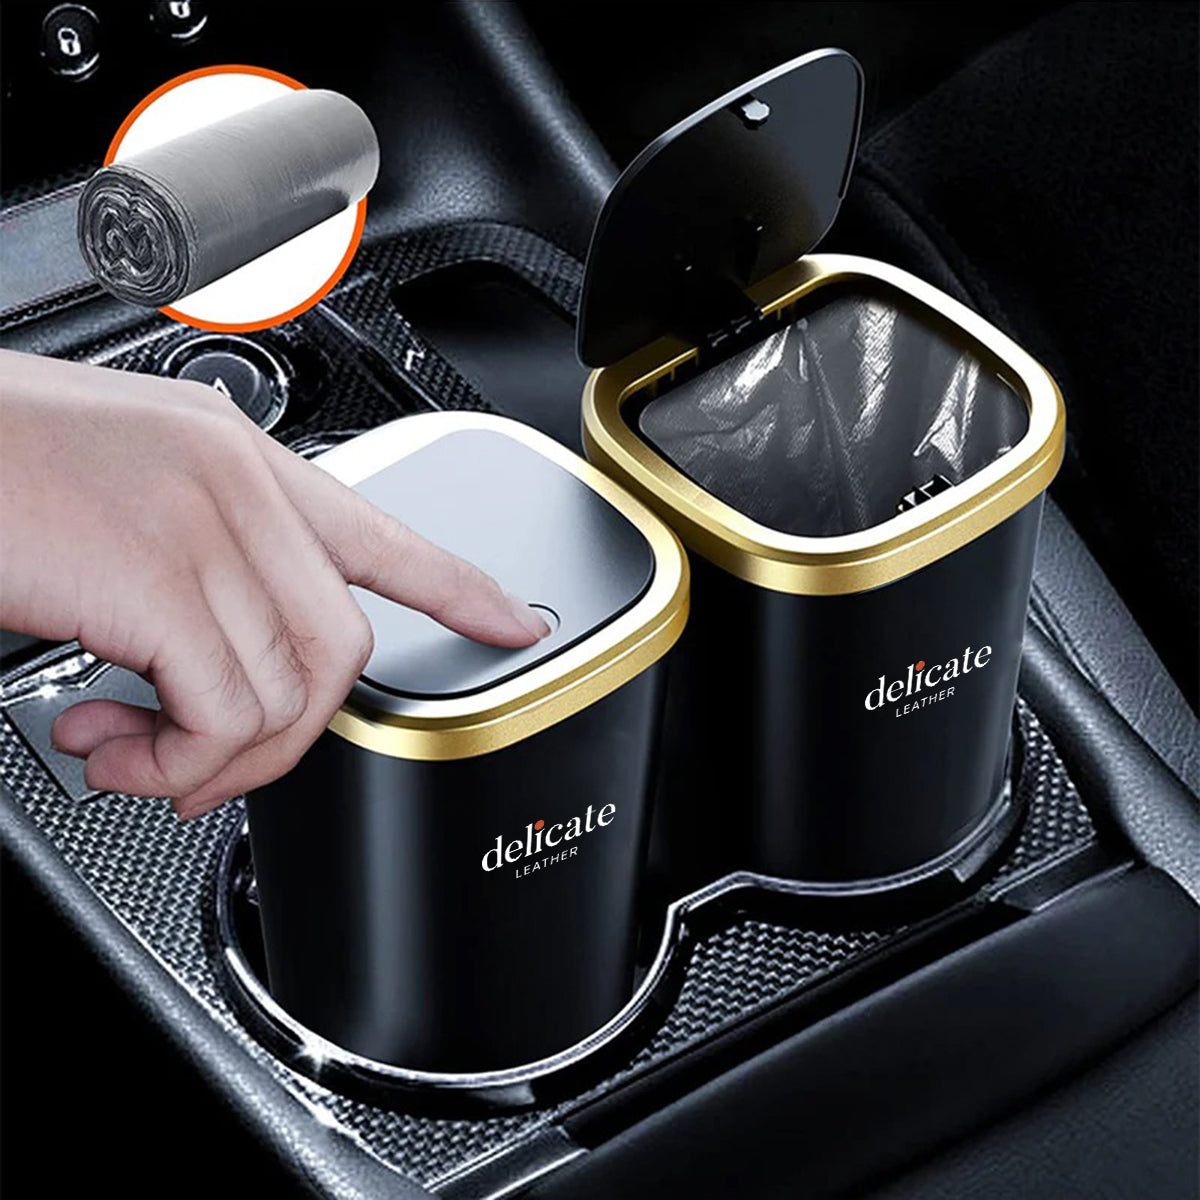 Car Trash Cans, Custom For Your Cars, Compact & Durable Car Accessories for Interior Use 2 Pack, Practical Car Organizers and Storage Cups with Pop-Up Open, Car Accessories KX11993 - Delicate Leather